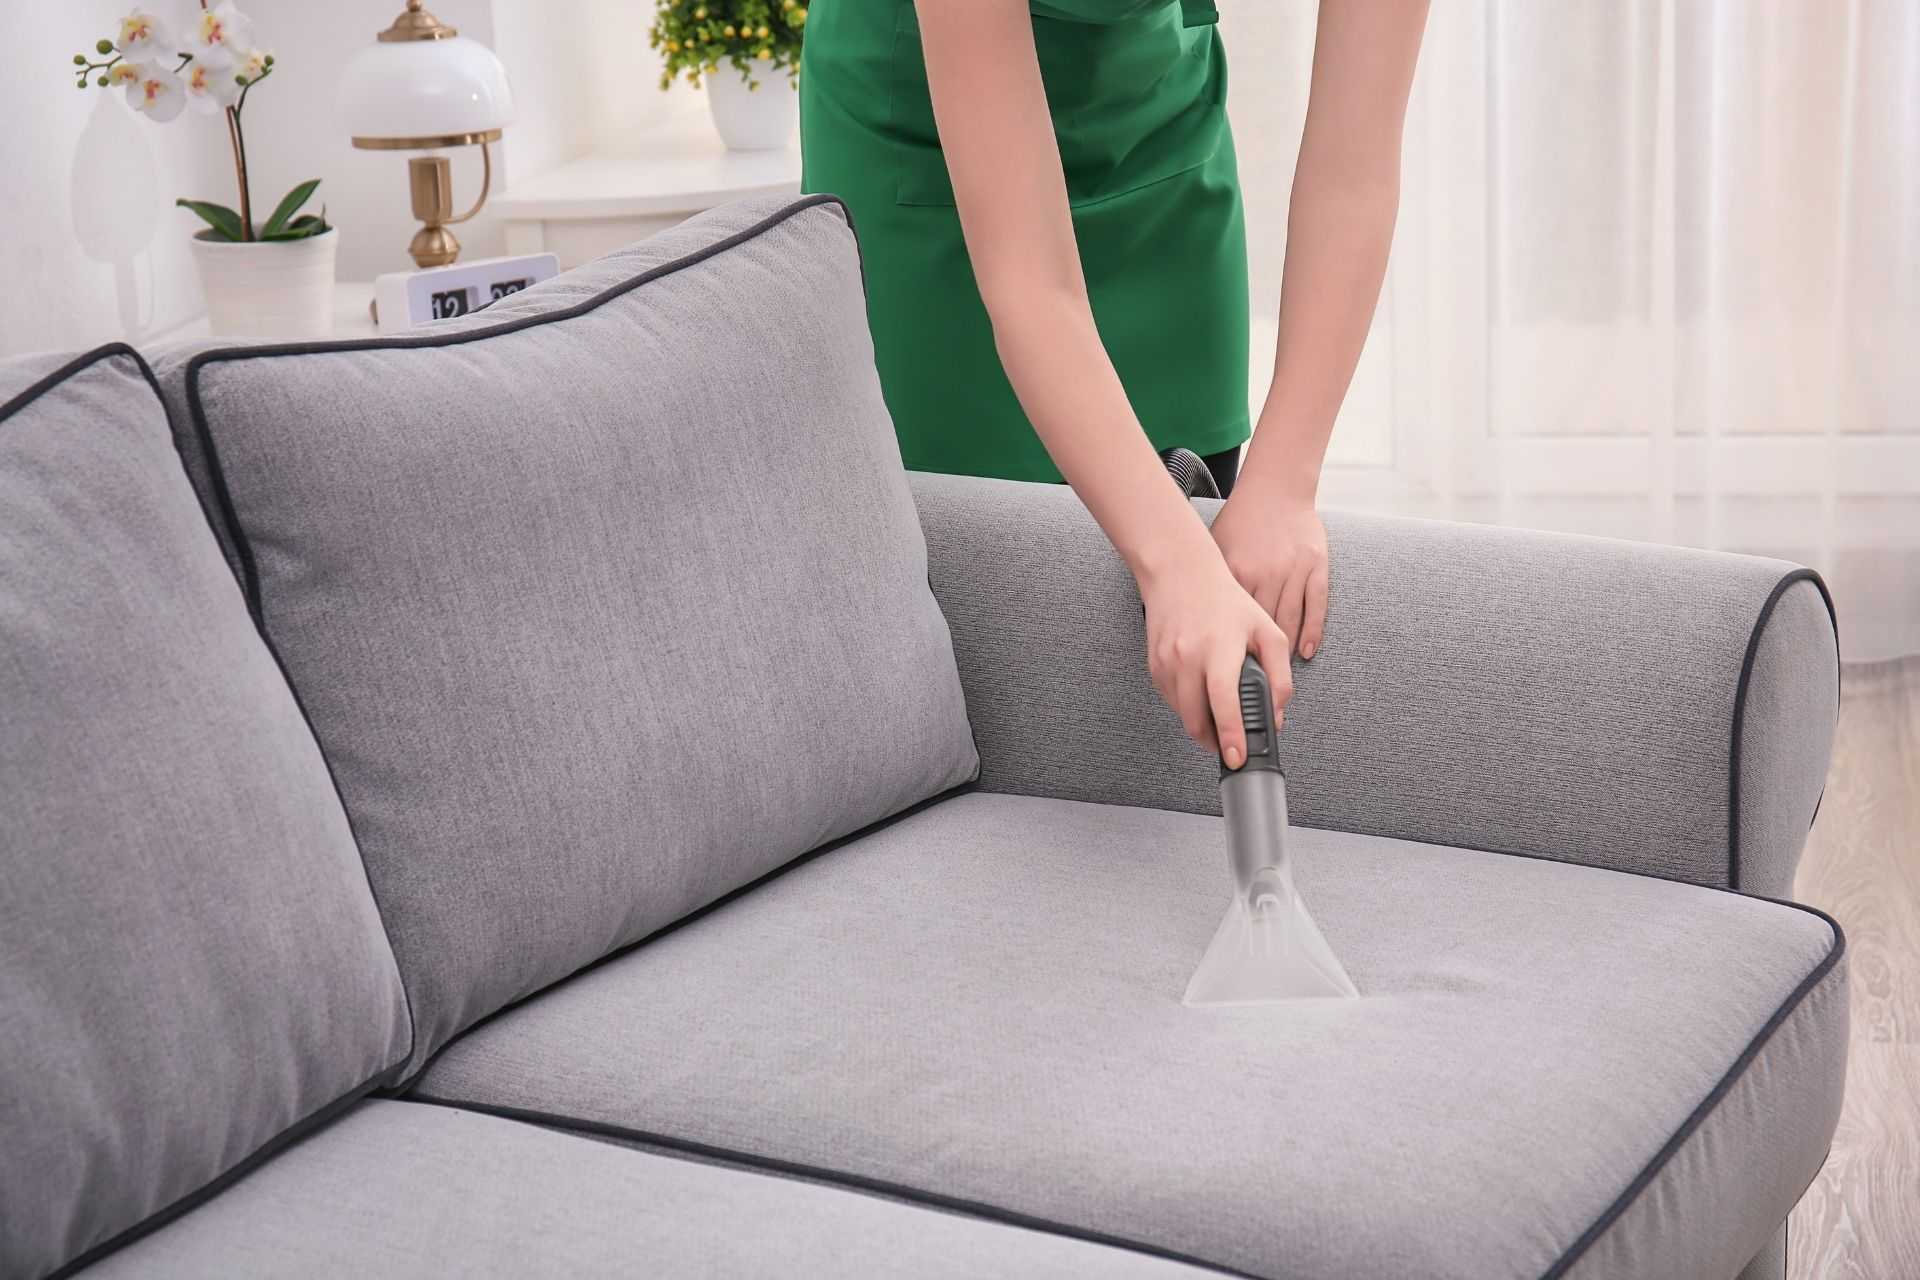 Upholstery Cleaning Services offered by Busy Boys in Squamish, Surrey, BC